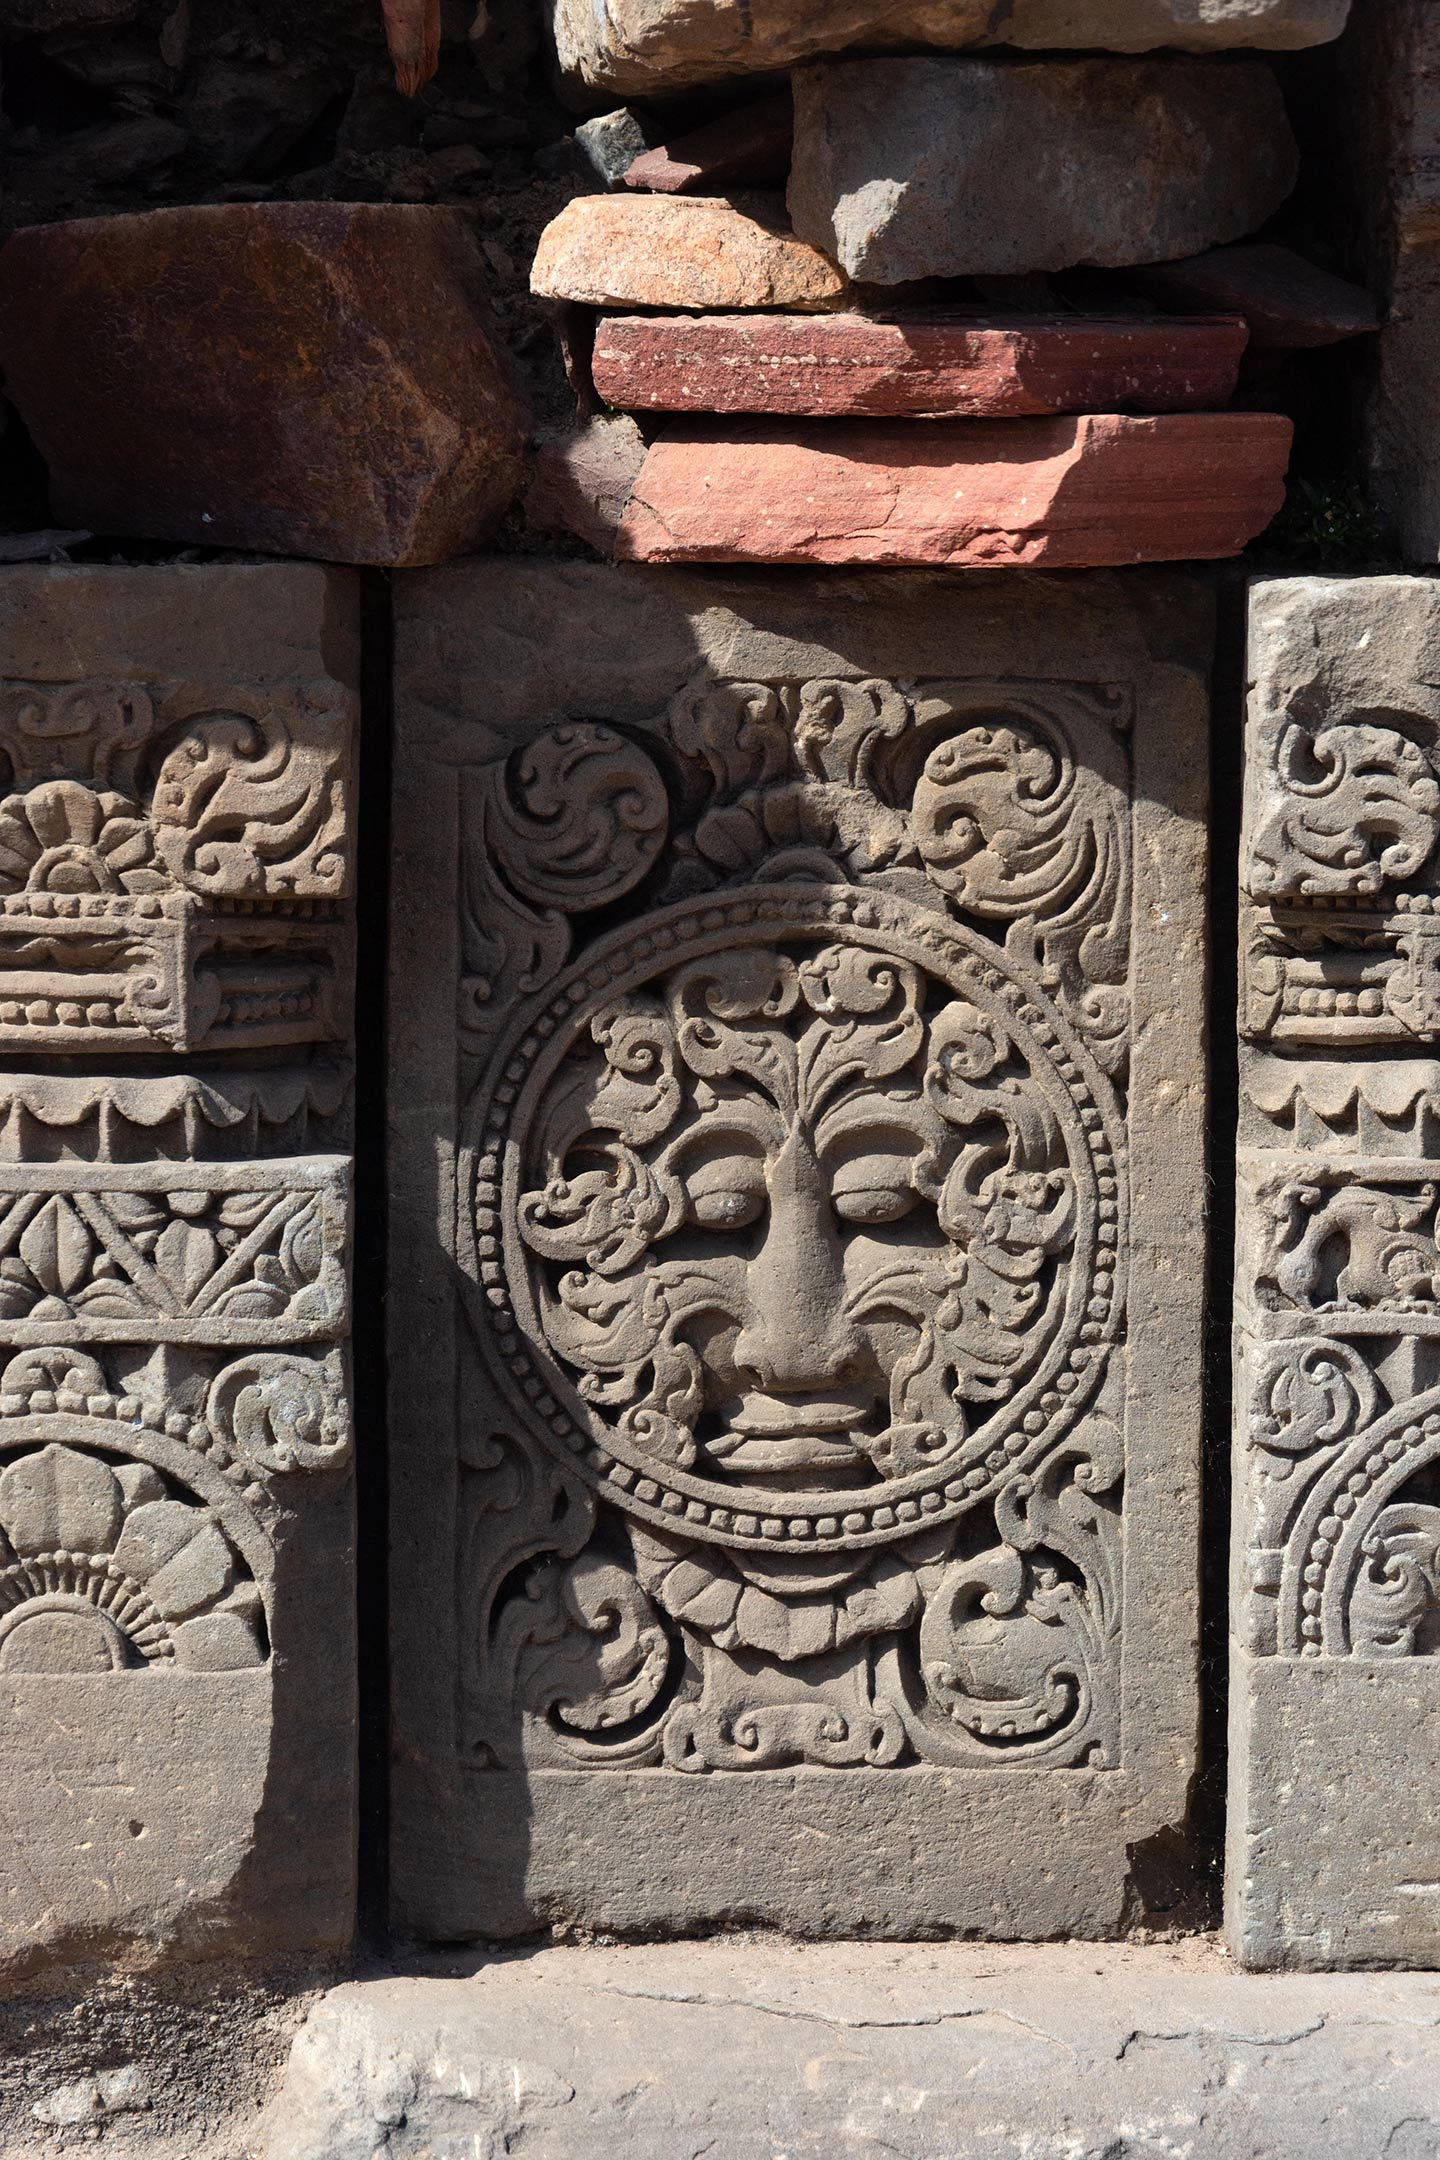 The medallion in the centre of the plaque has a kirtimukha (face of glory). The rest of the plaque surface is decorated with ardha padma (half lotus) and kalpa lata (creeper) motifs.